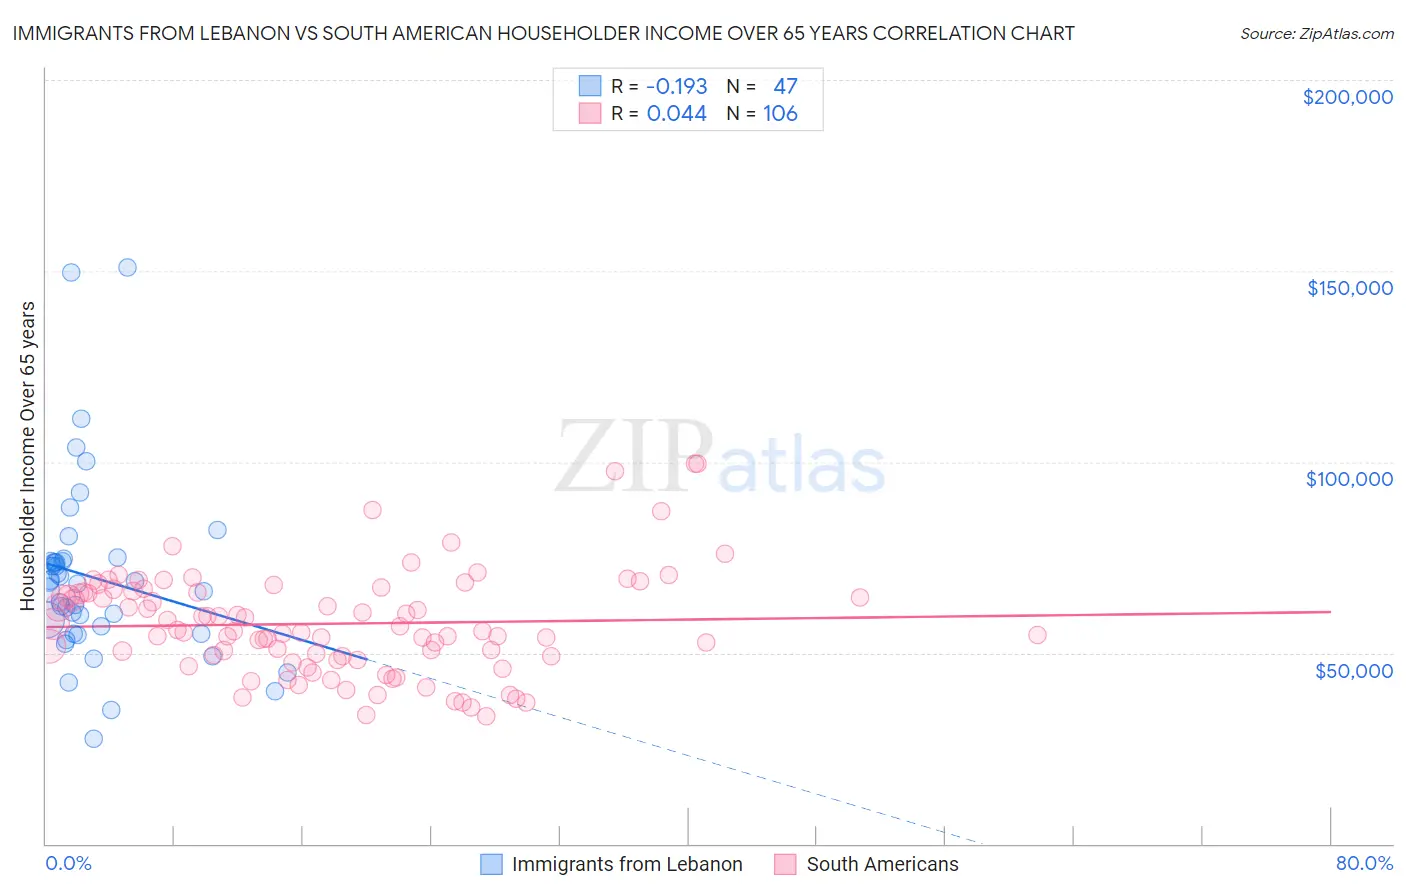 Immigrants from Lebanon vs South American Householder Income Over 65 years